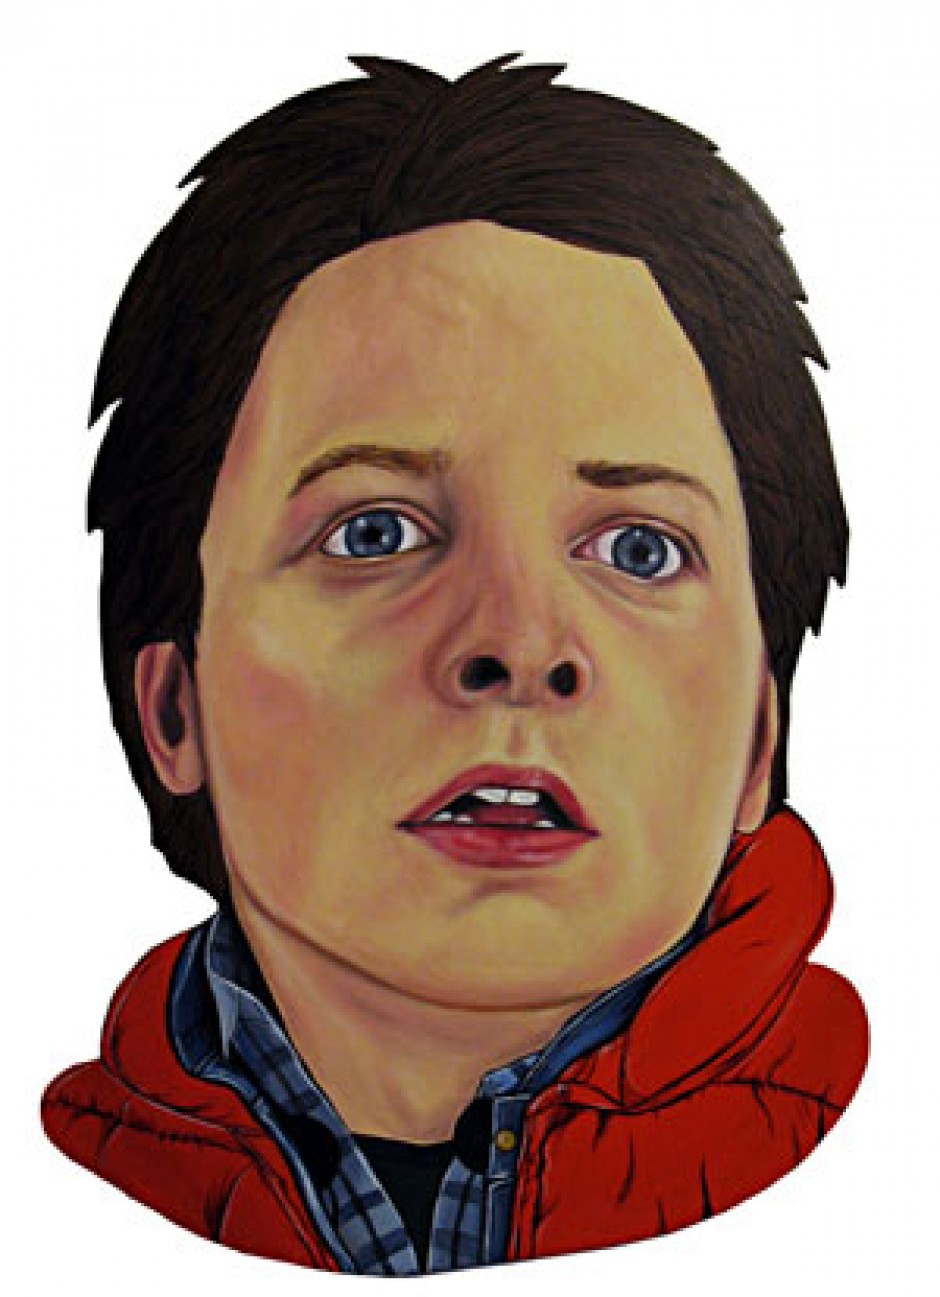 Andrea Hooge's Marty McFly